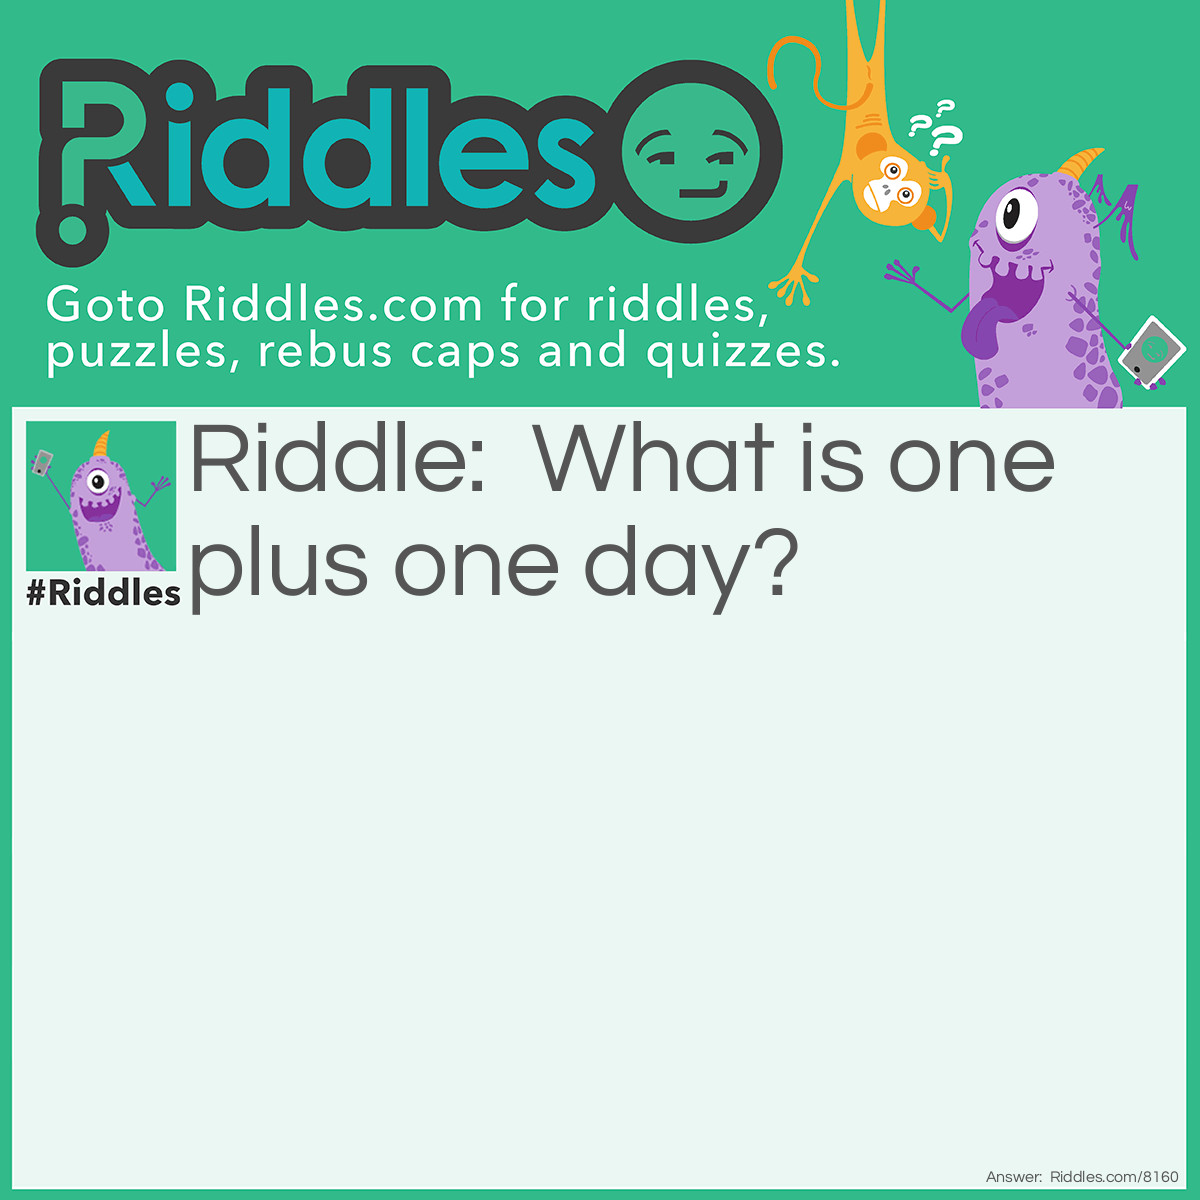 Riddle: What is one plus one day? Answer: Sum-day.